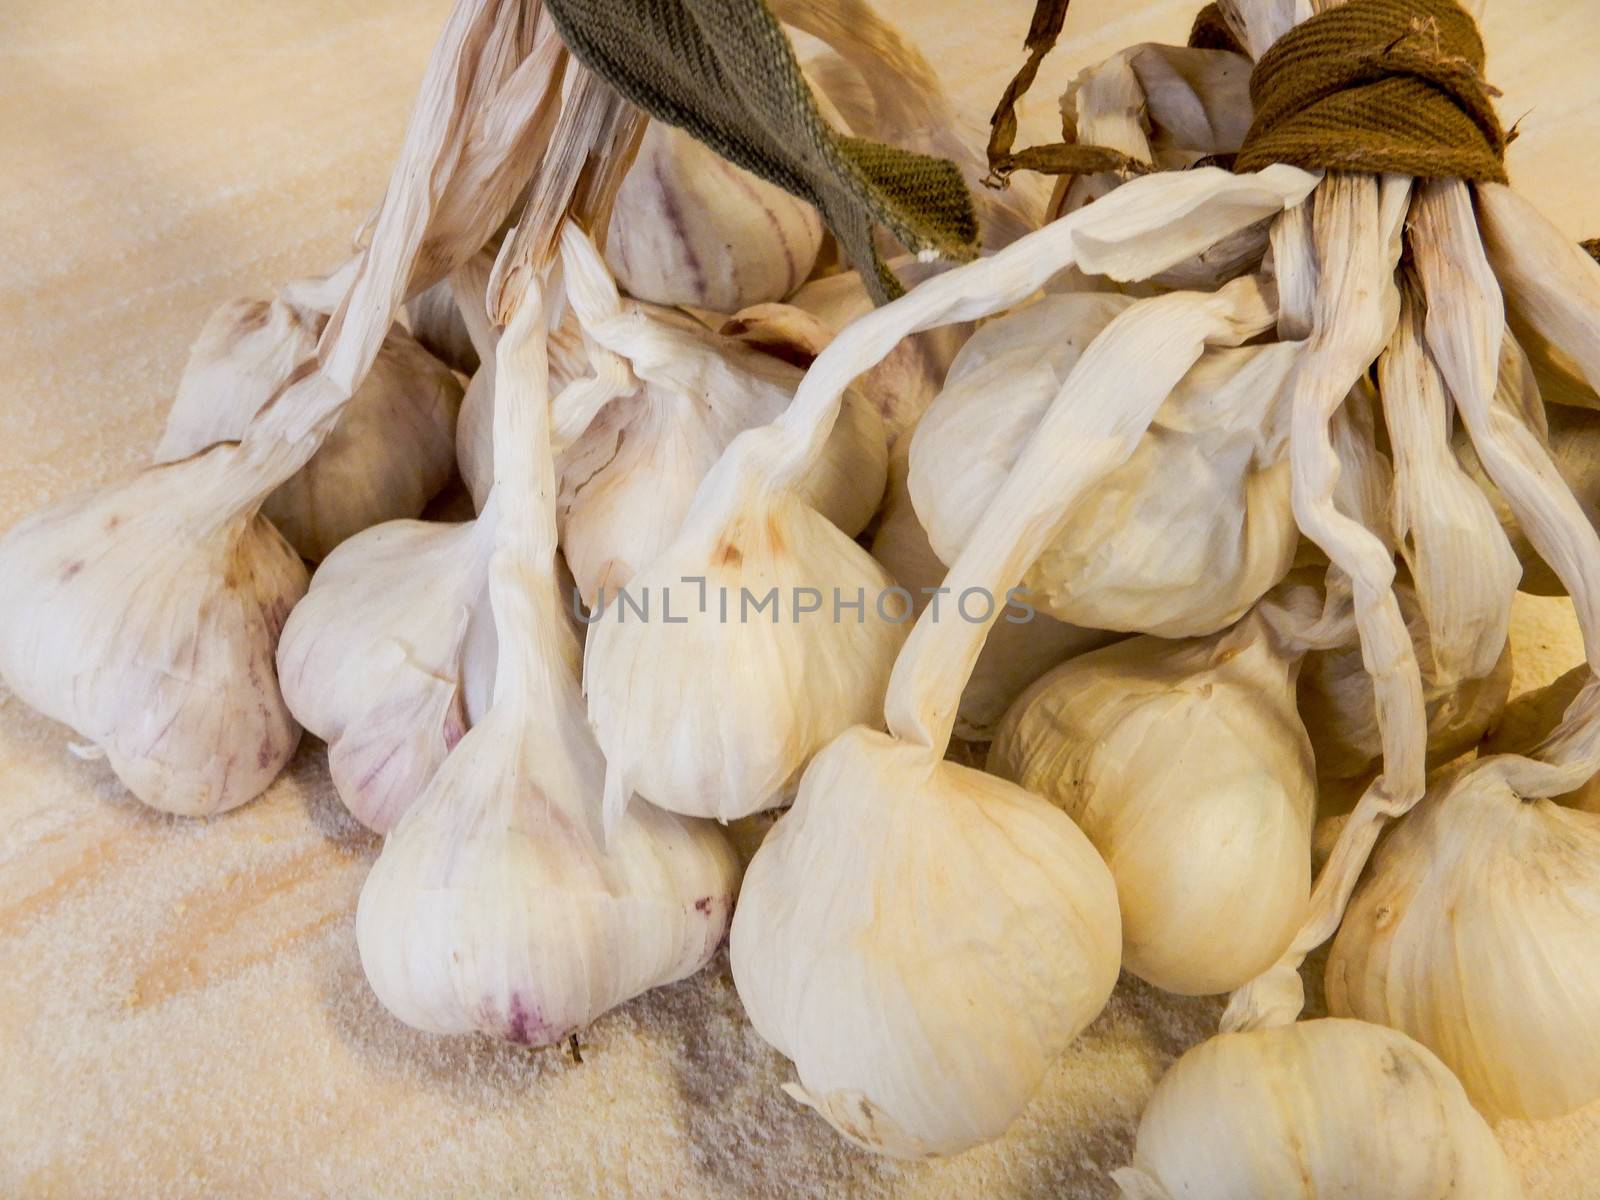 Some garlic heads for cooking by cosca